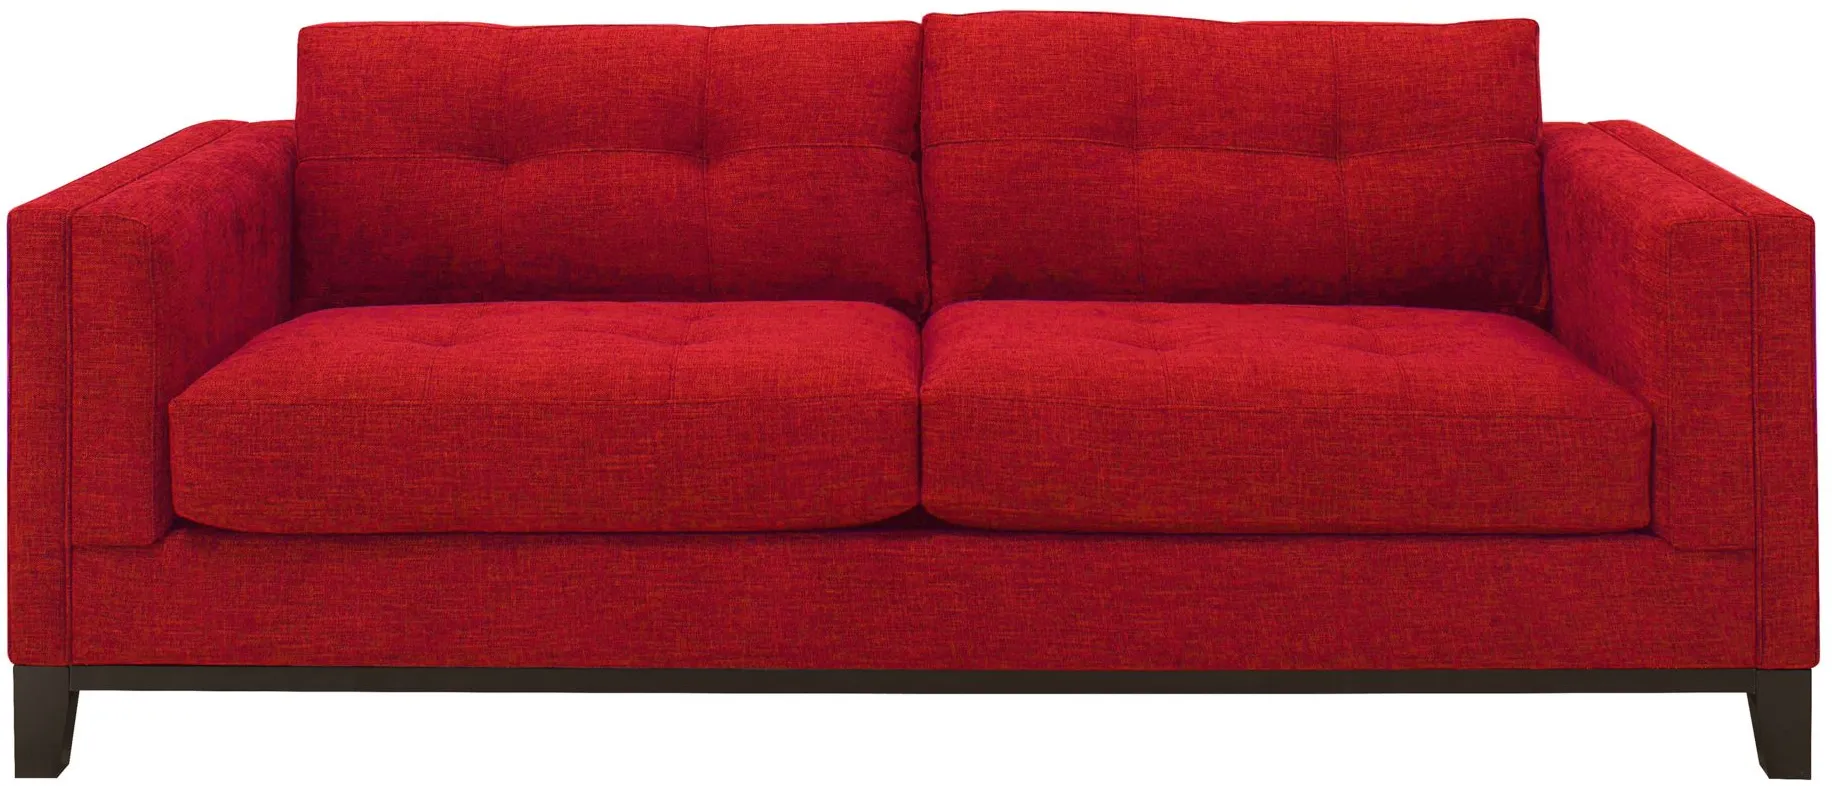 Mirasol Sofa in Suede so Soft Cardinal by H.M. Richards